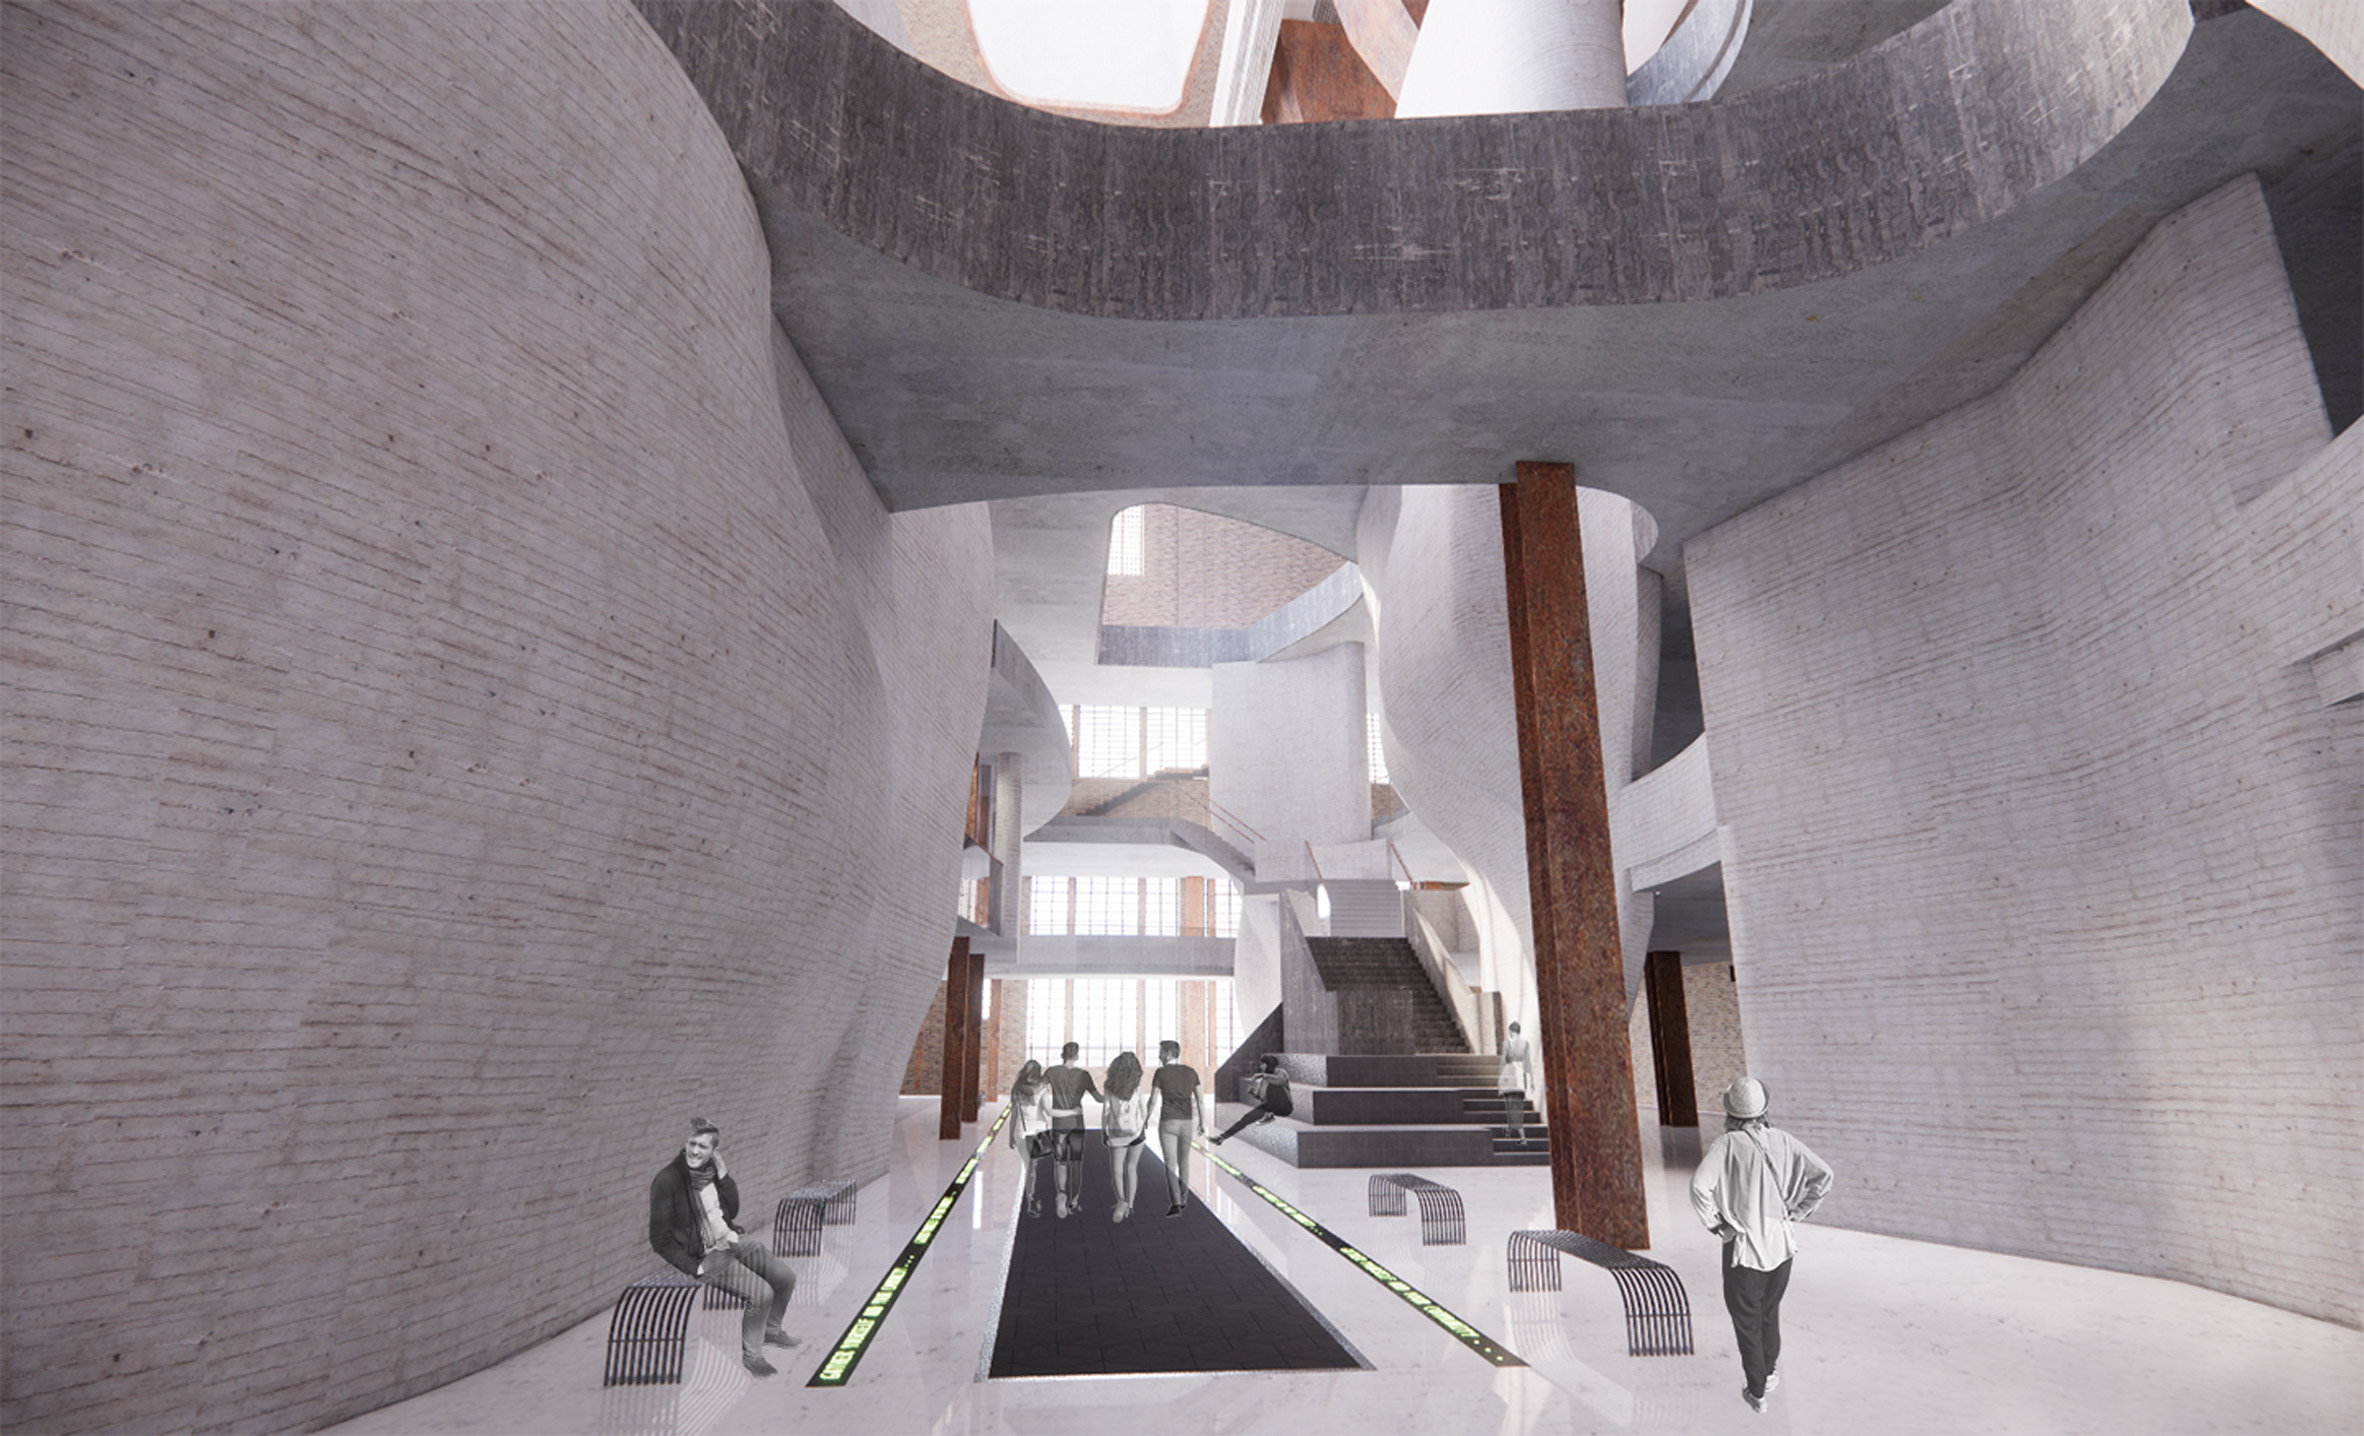 Render of the civic climate change research and education precinct